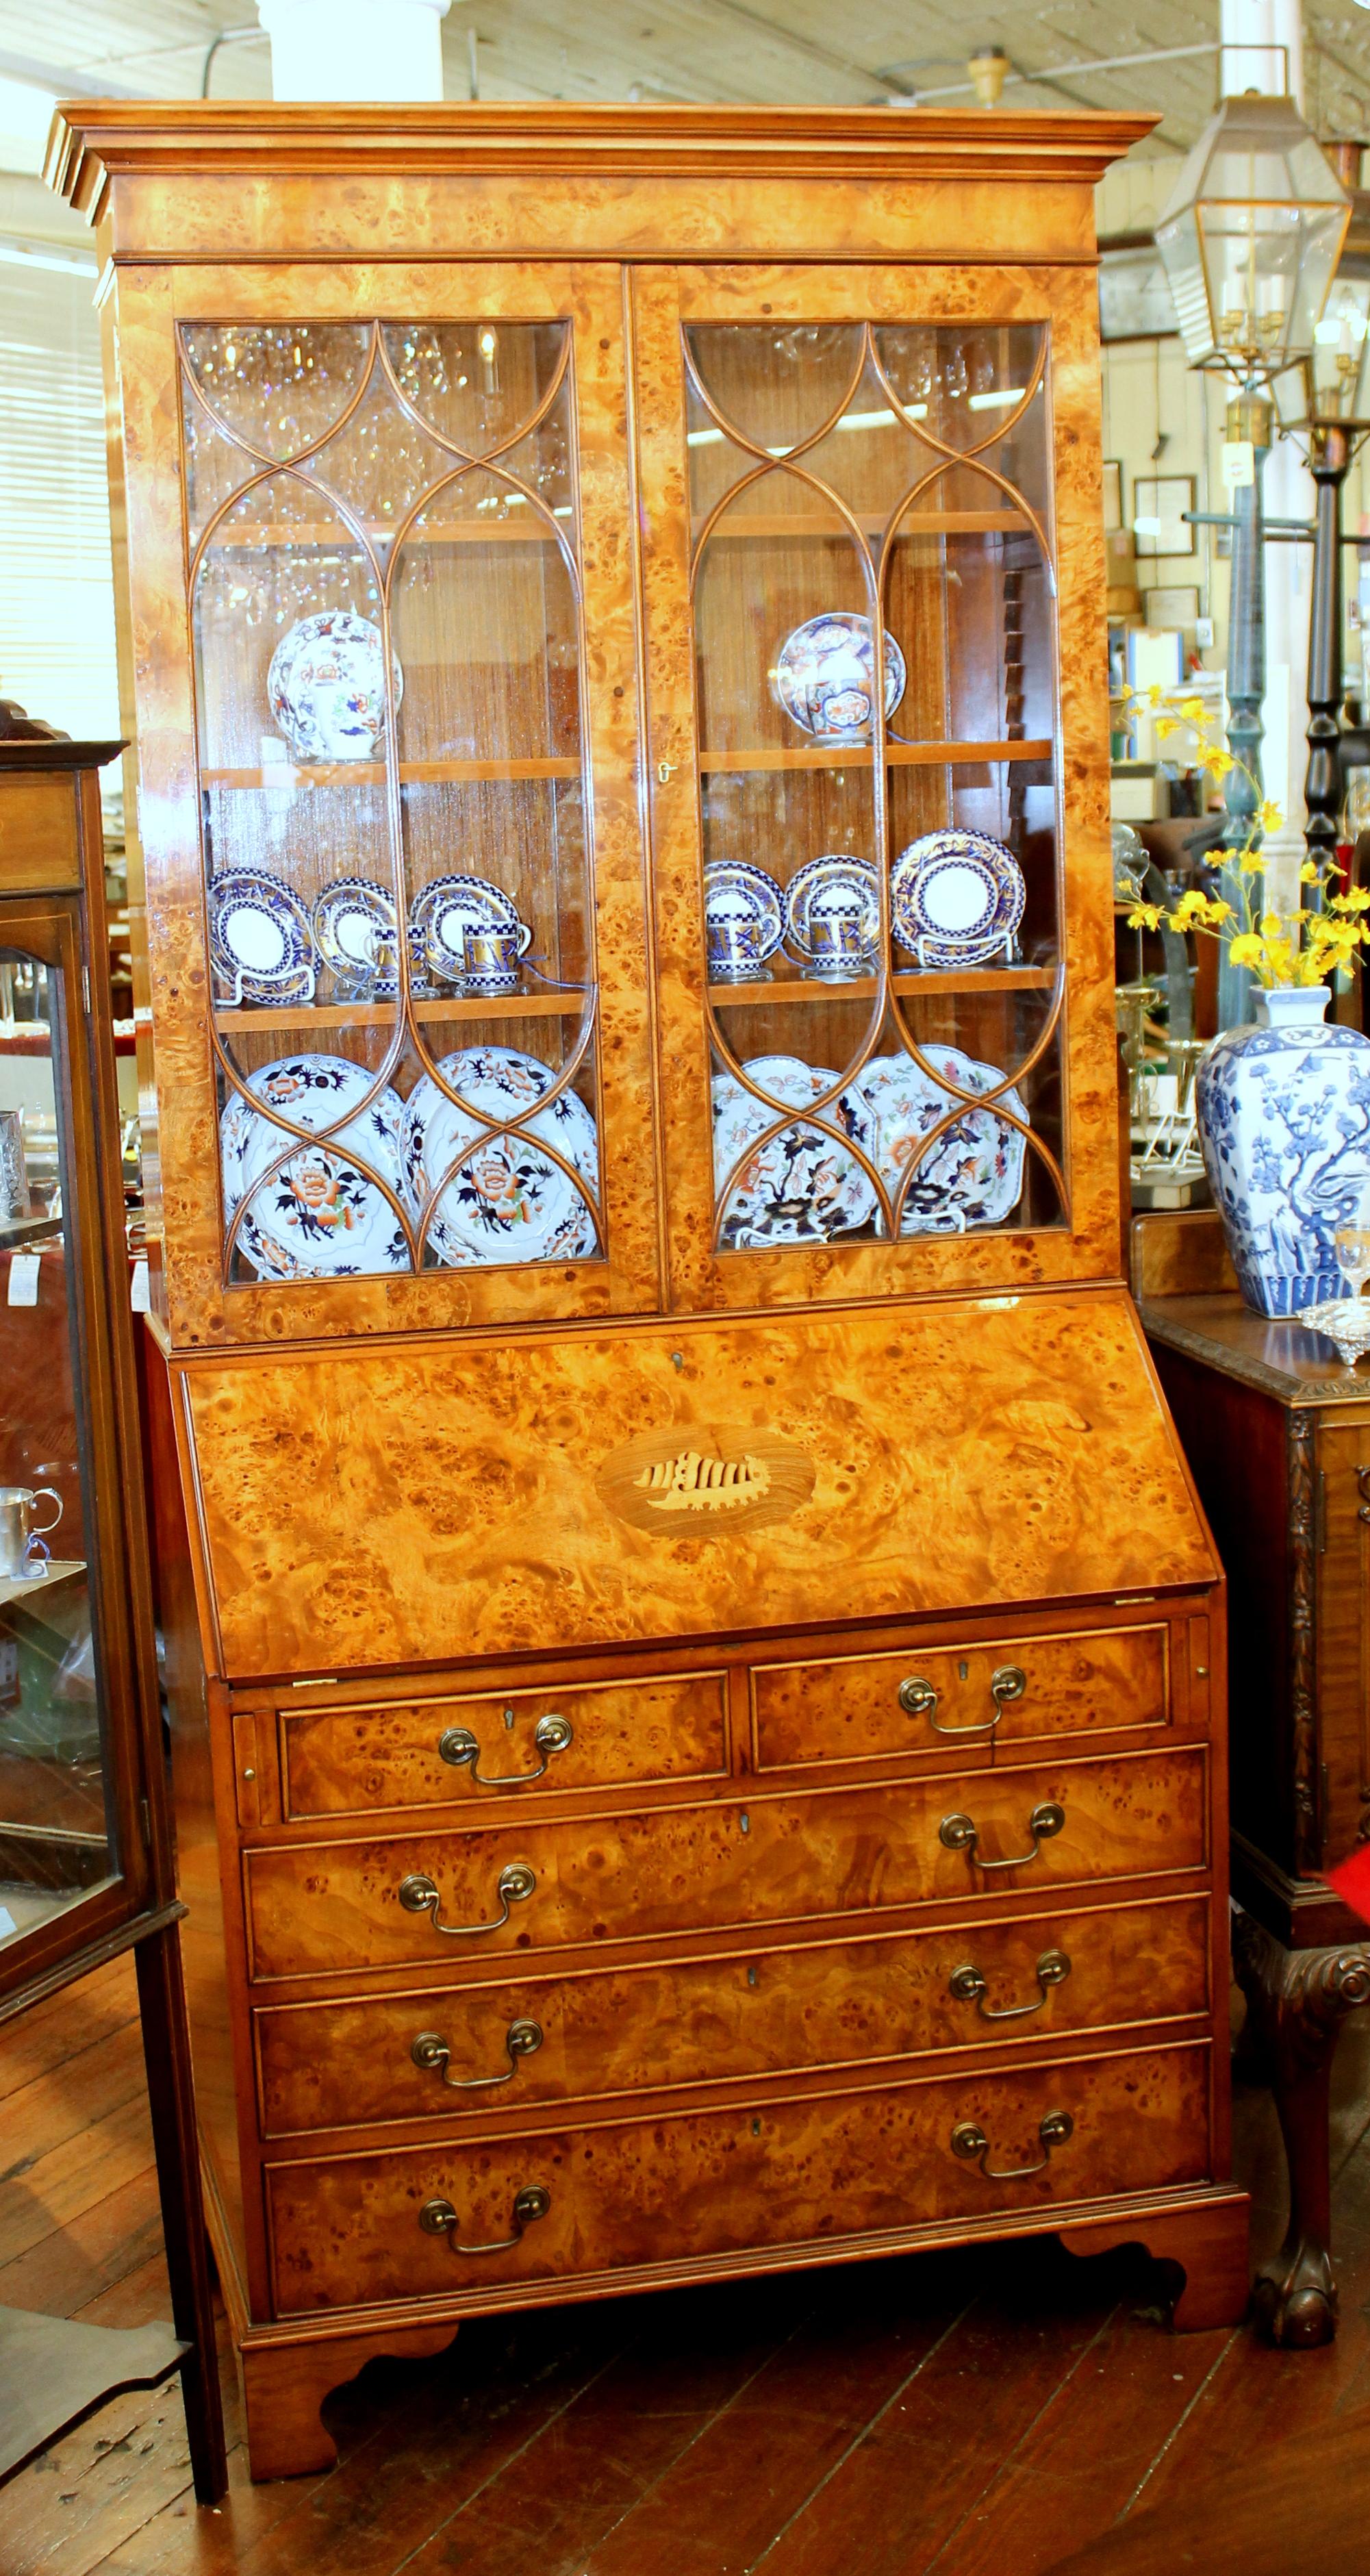 Exceptional quality English bench-made inlaid burr elm Chippendale style bureau bookcase/ secretary with handsome fitted interior and leather surface

Please note fabulous burr elm veneers sweated from old furniture. Also note the handsome fitted